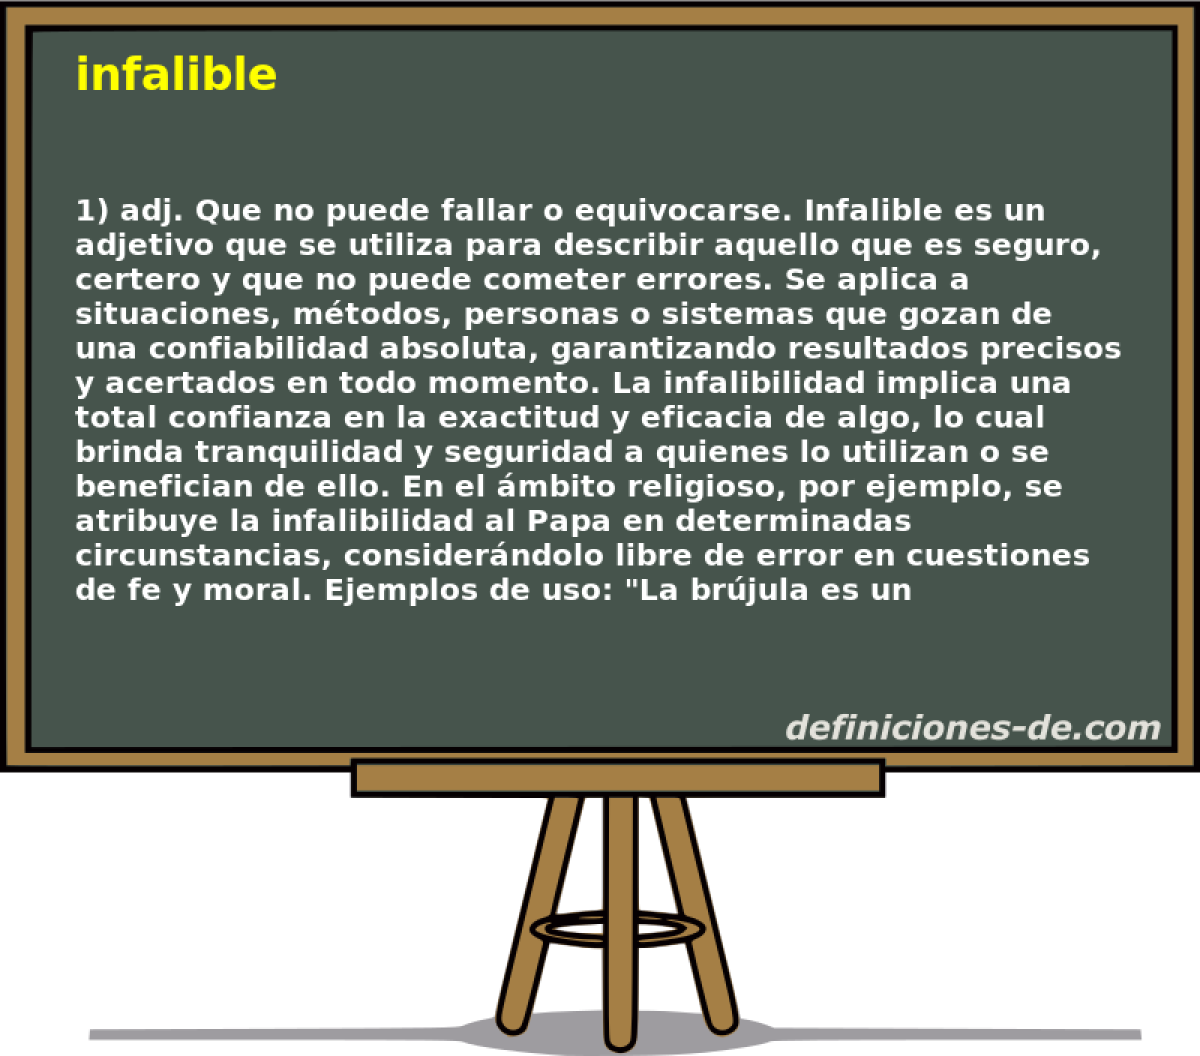 infalible 